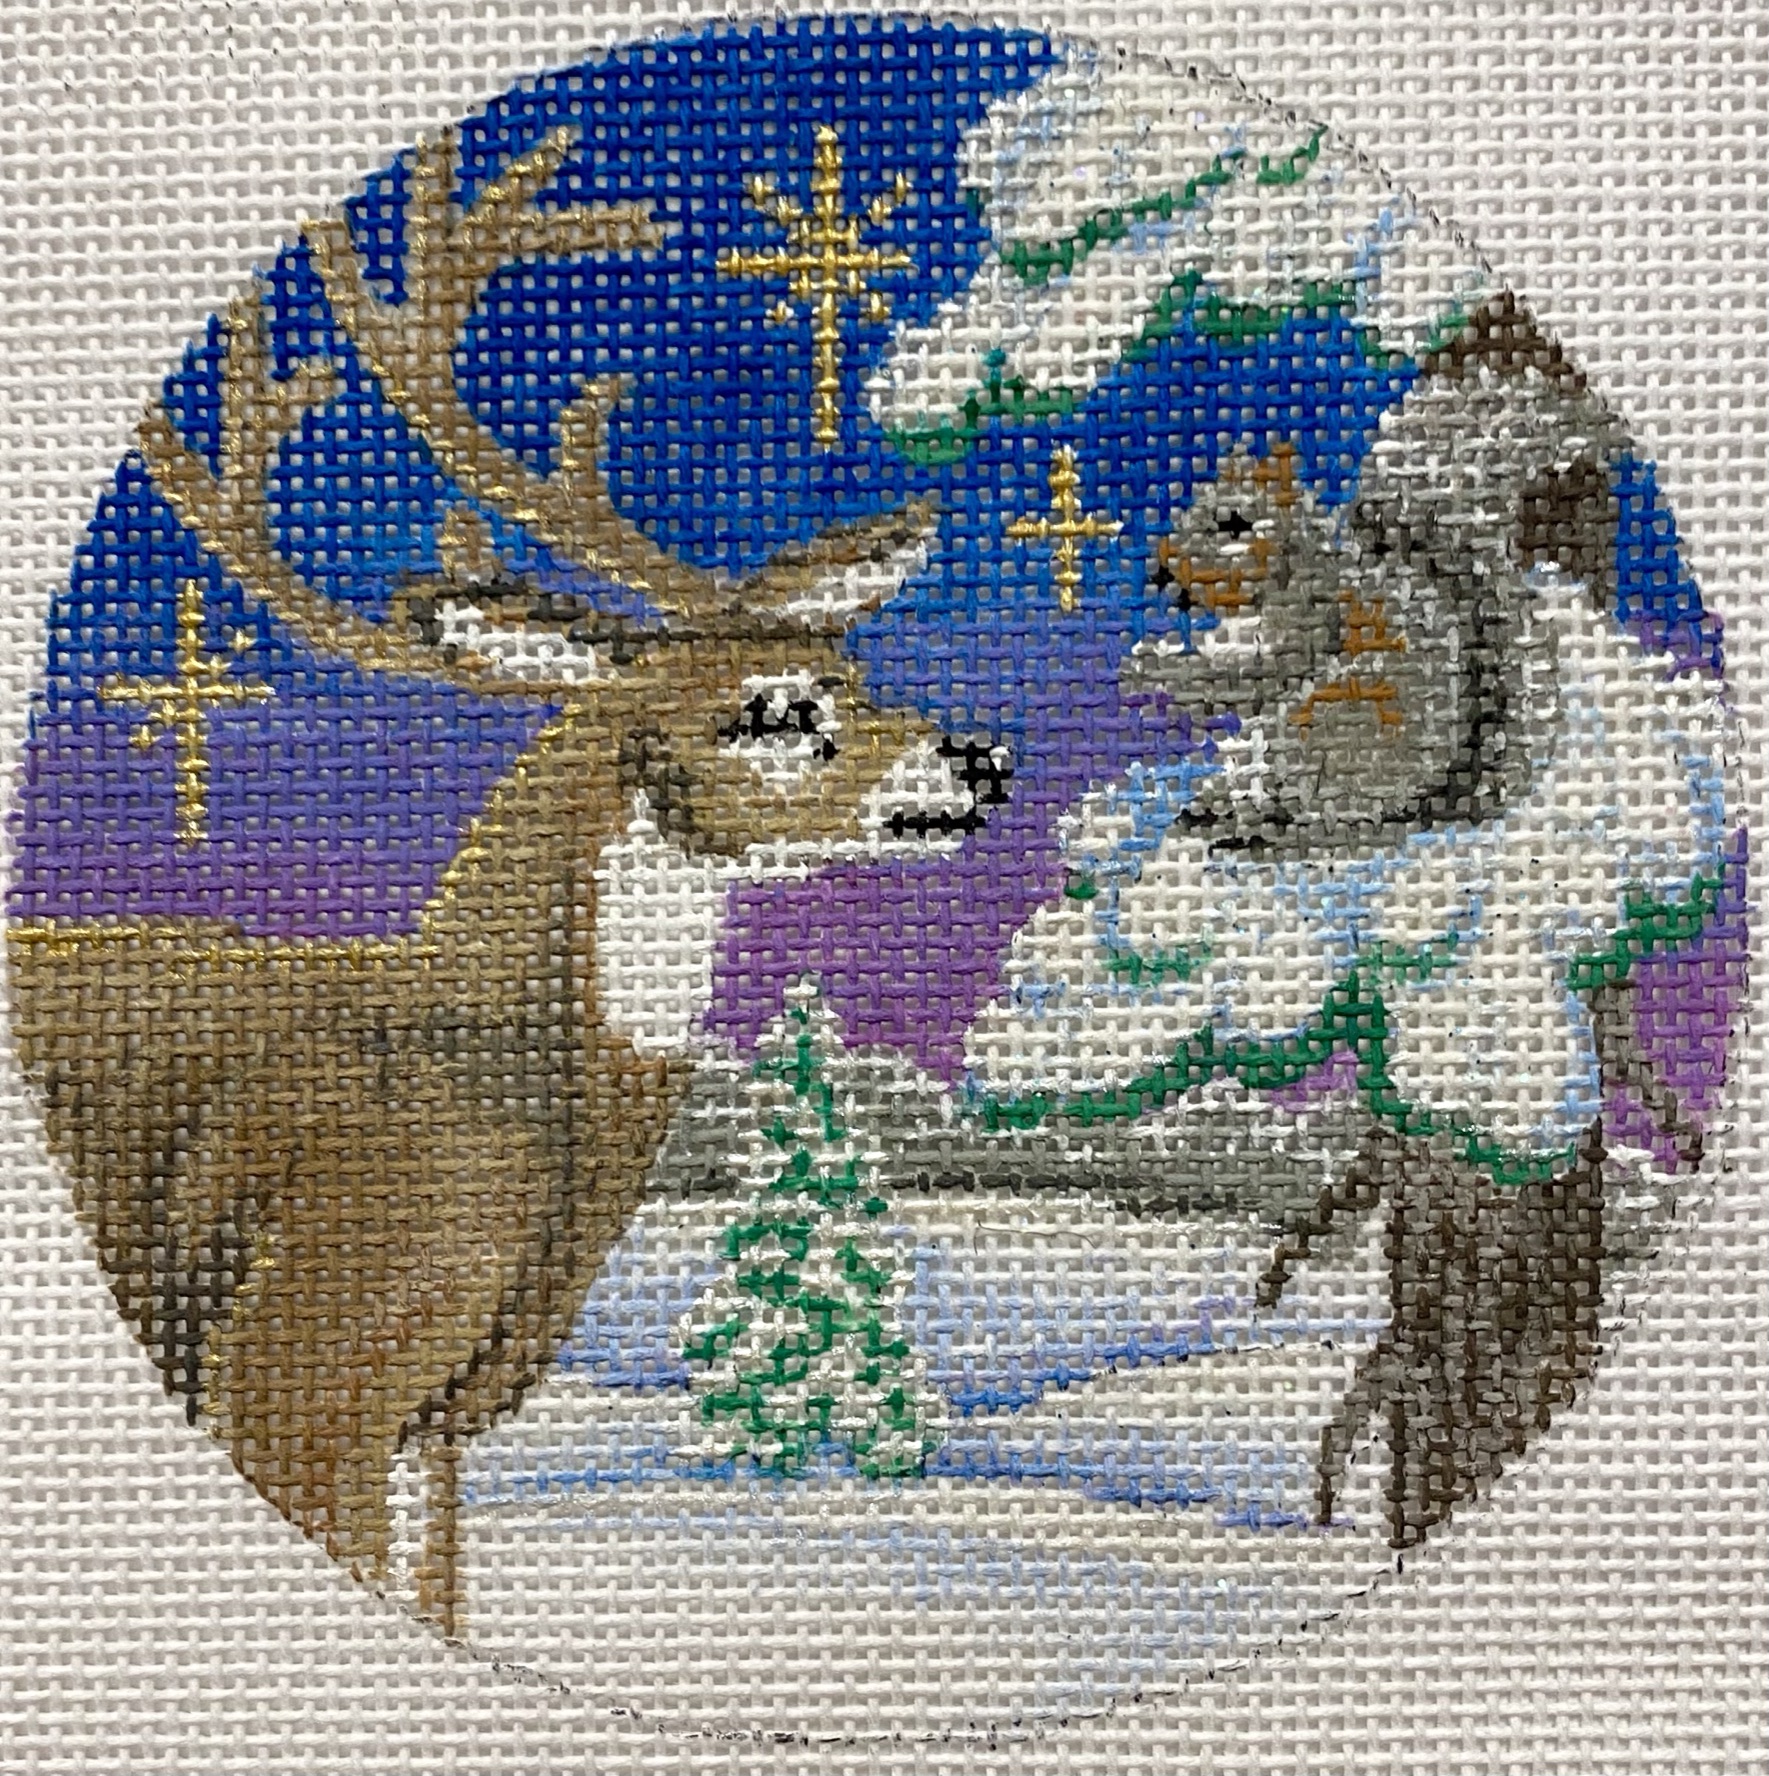 Stitch & Zip Round Ornament Needlepoint Kit by Alice Peterson Co.